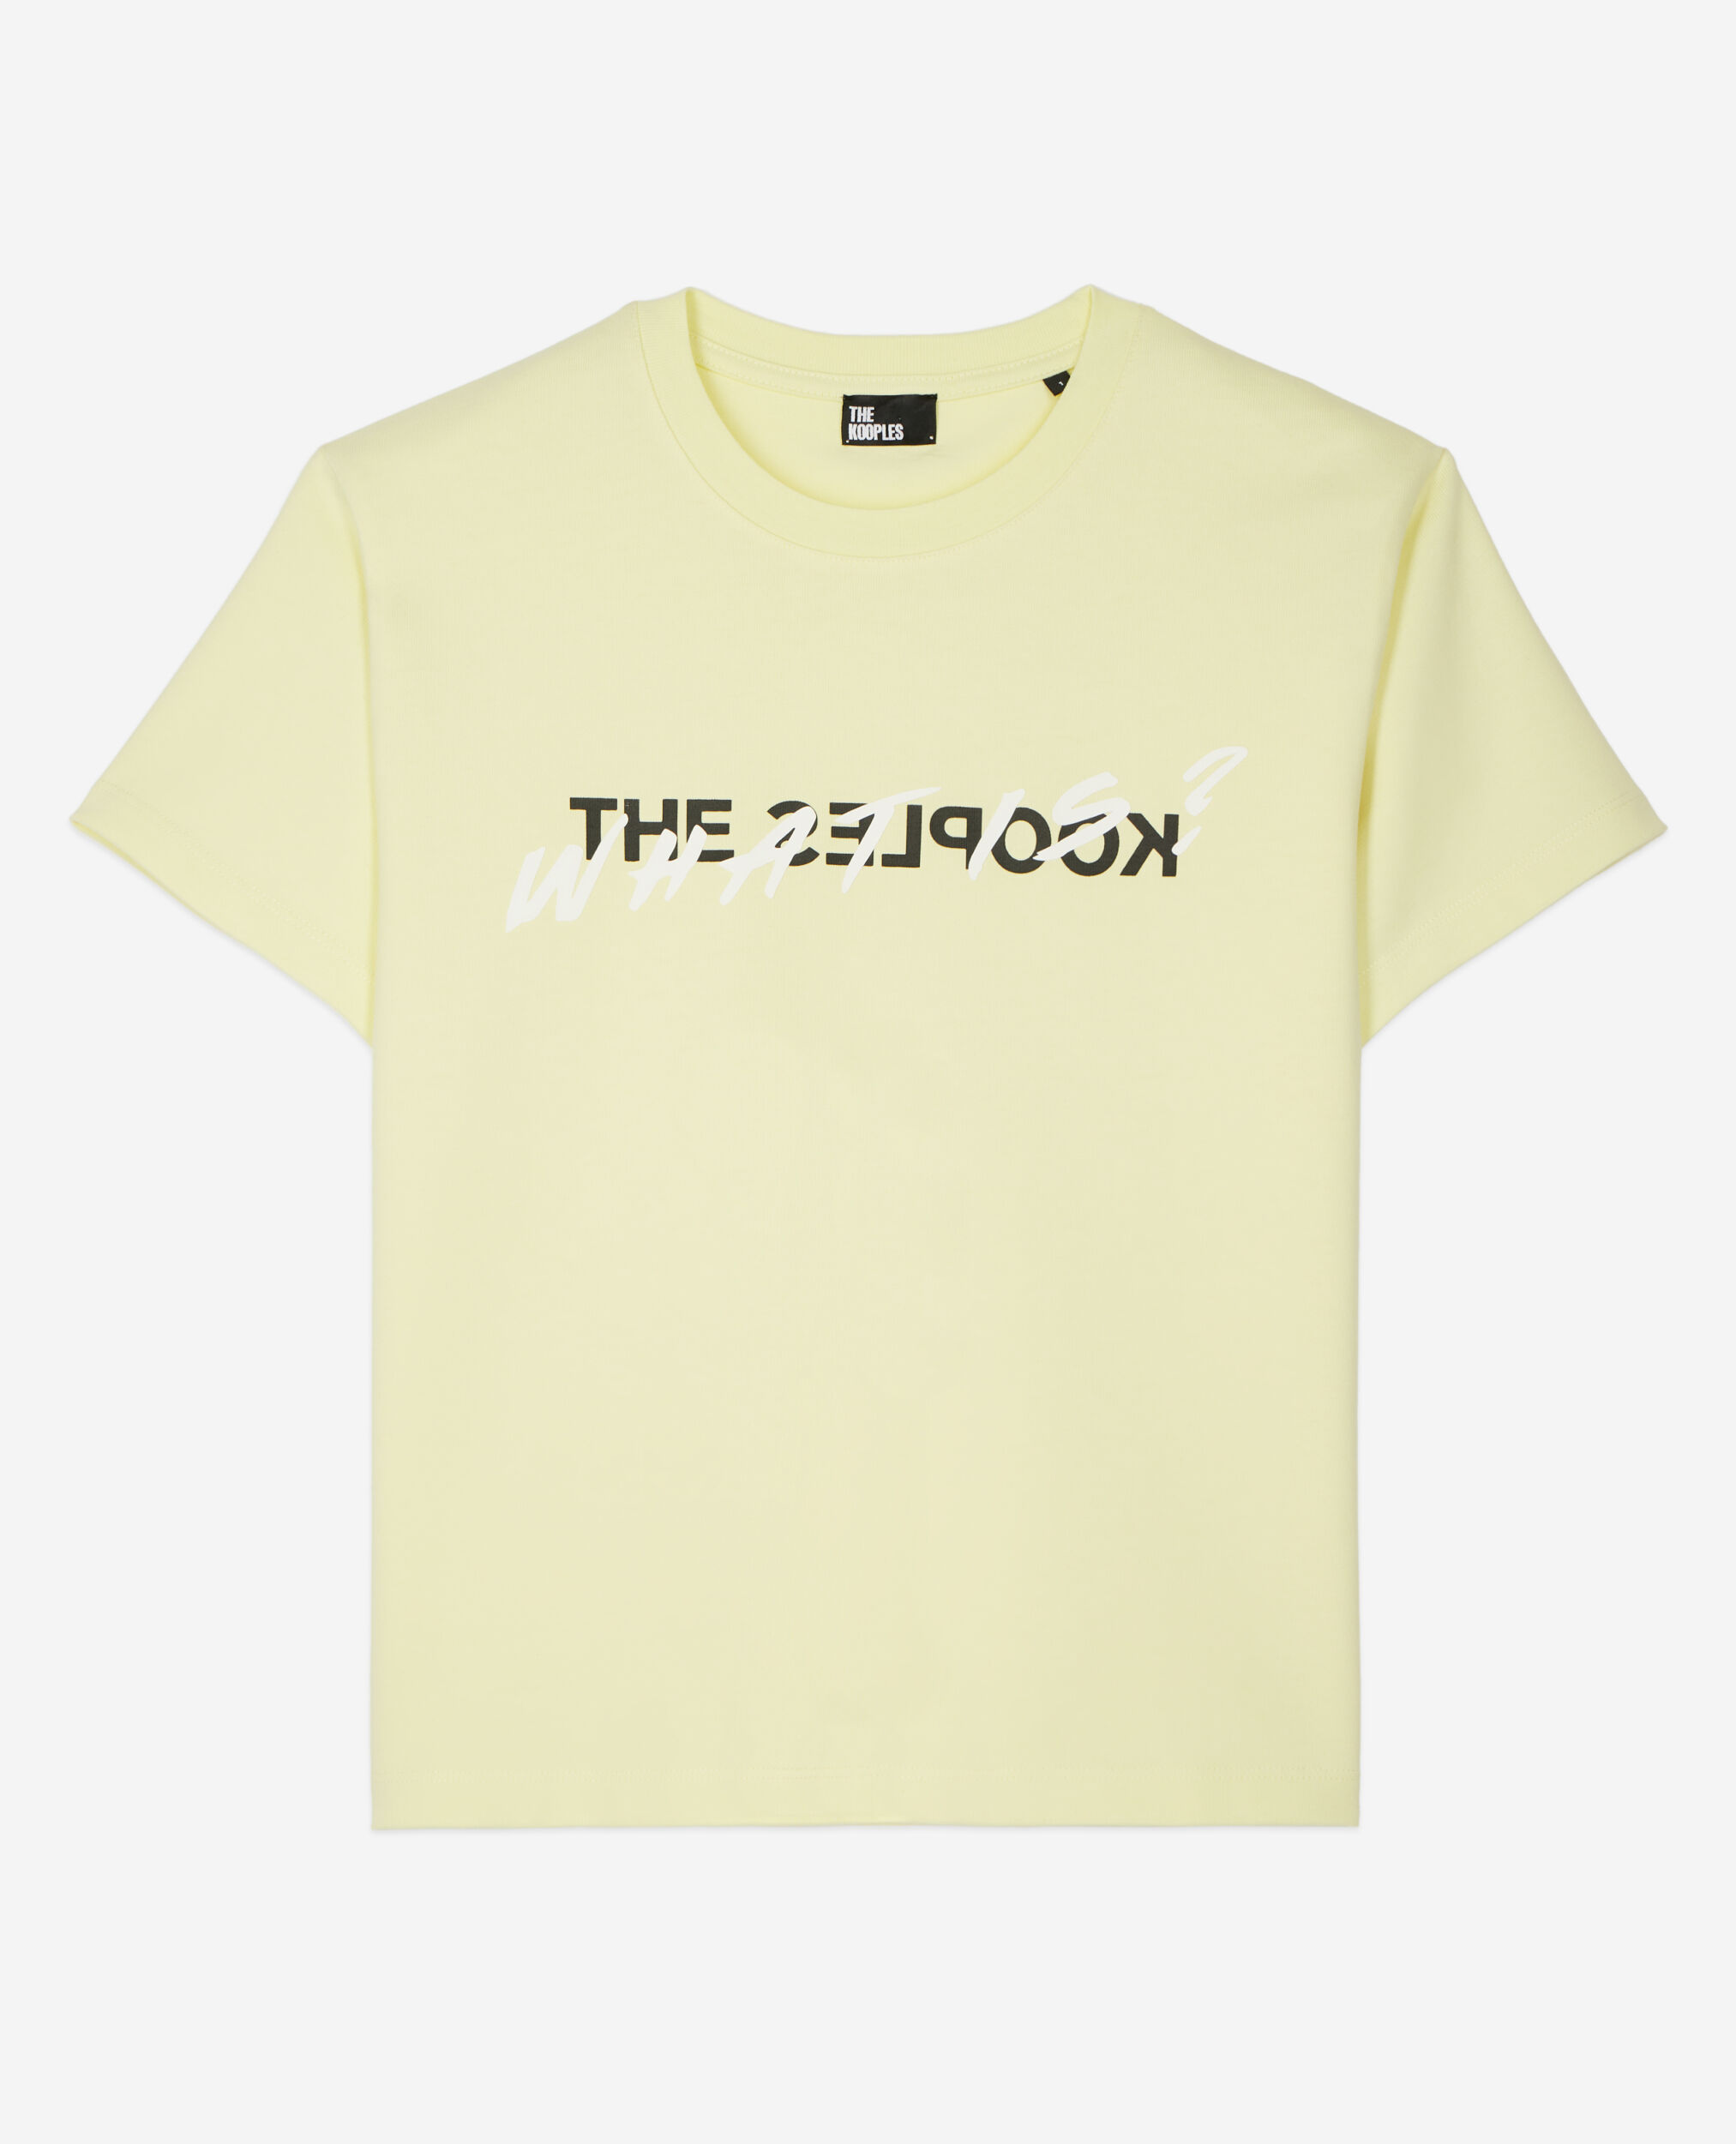 Hellgelbes T-Shirt mit „What is“-Schriftzug, BRIGHT YELLOW, hi-res image number null